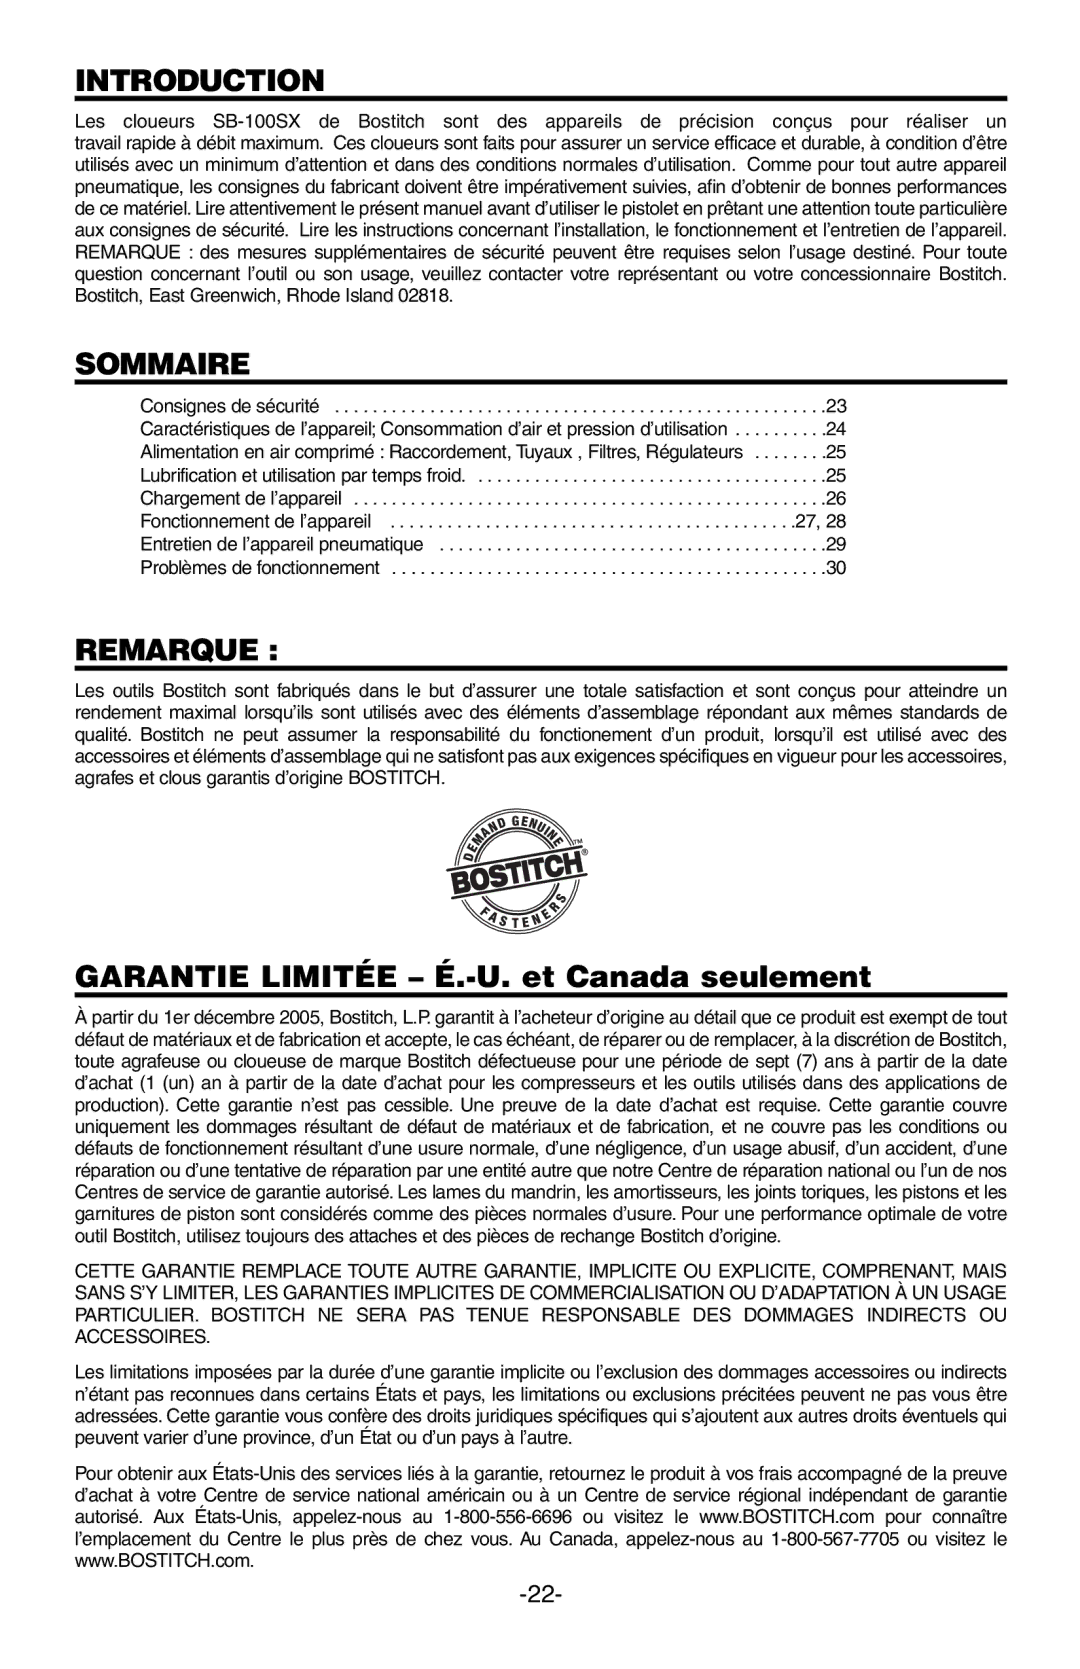 Bostitch SB-100SX manual Sommaire, Remarque 